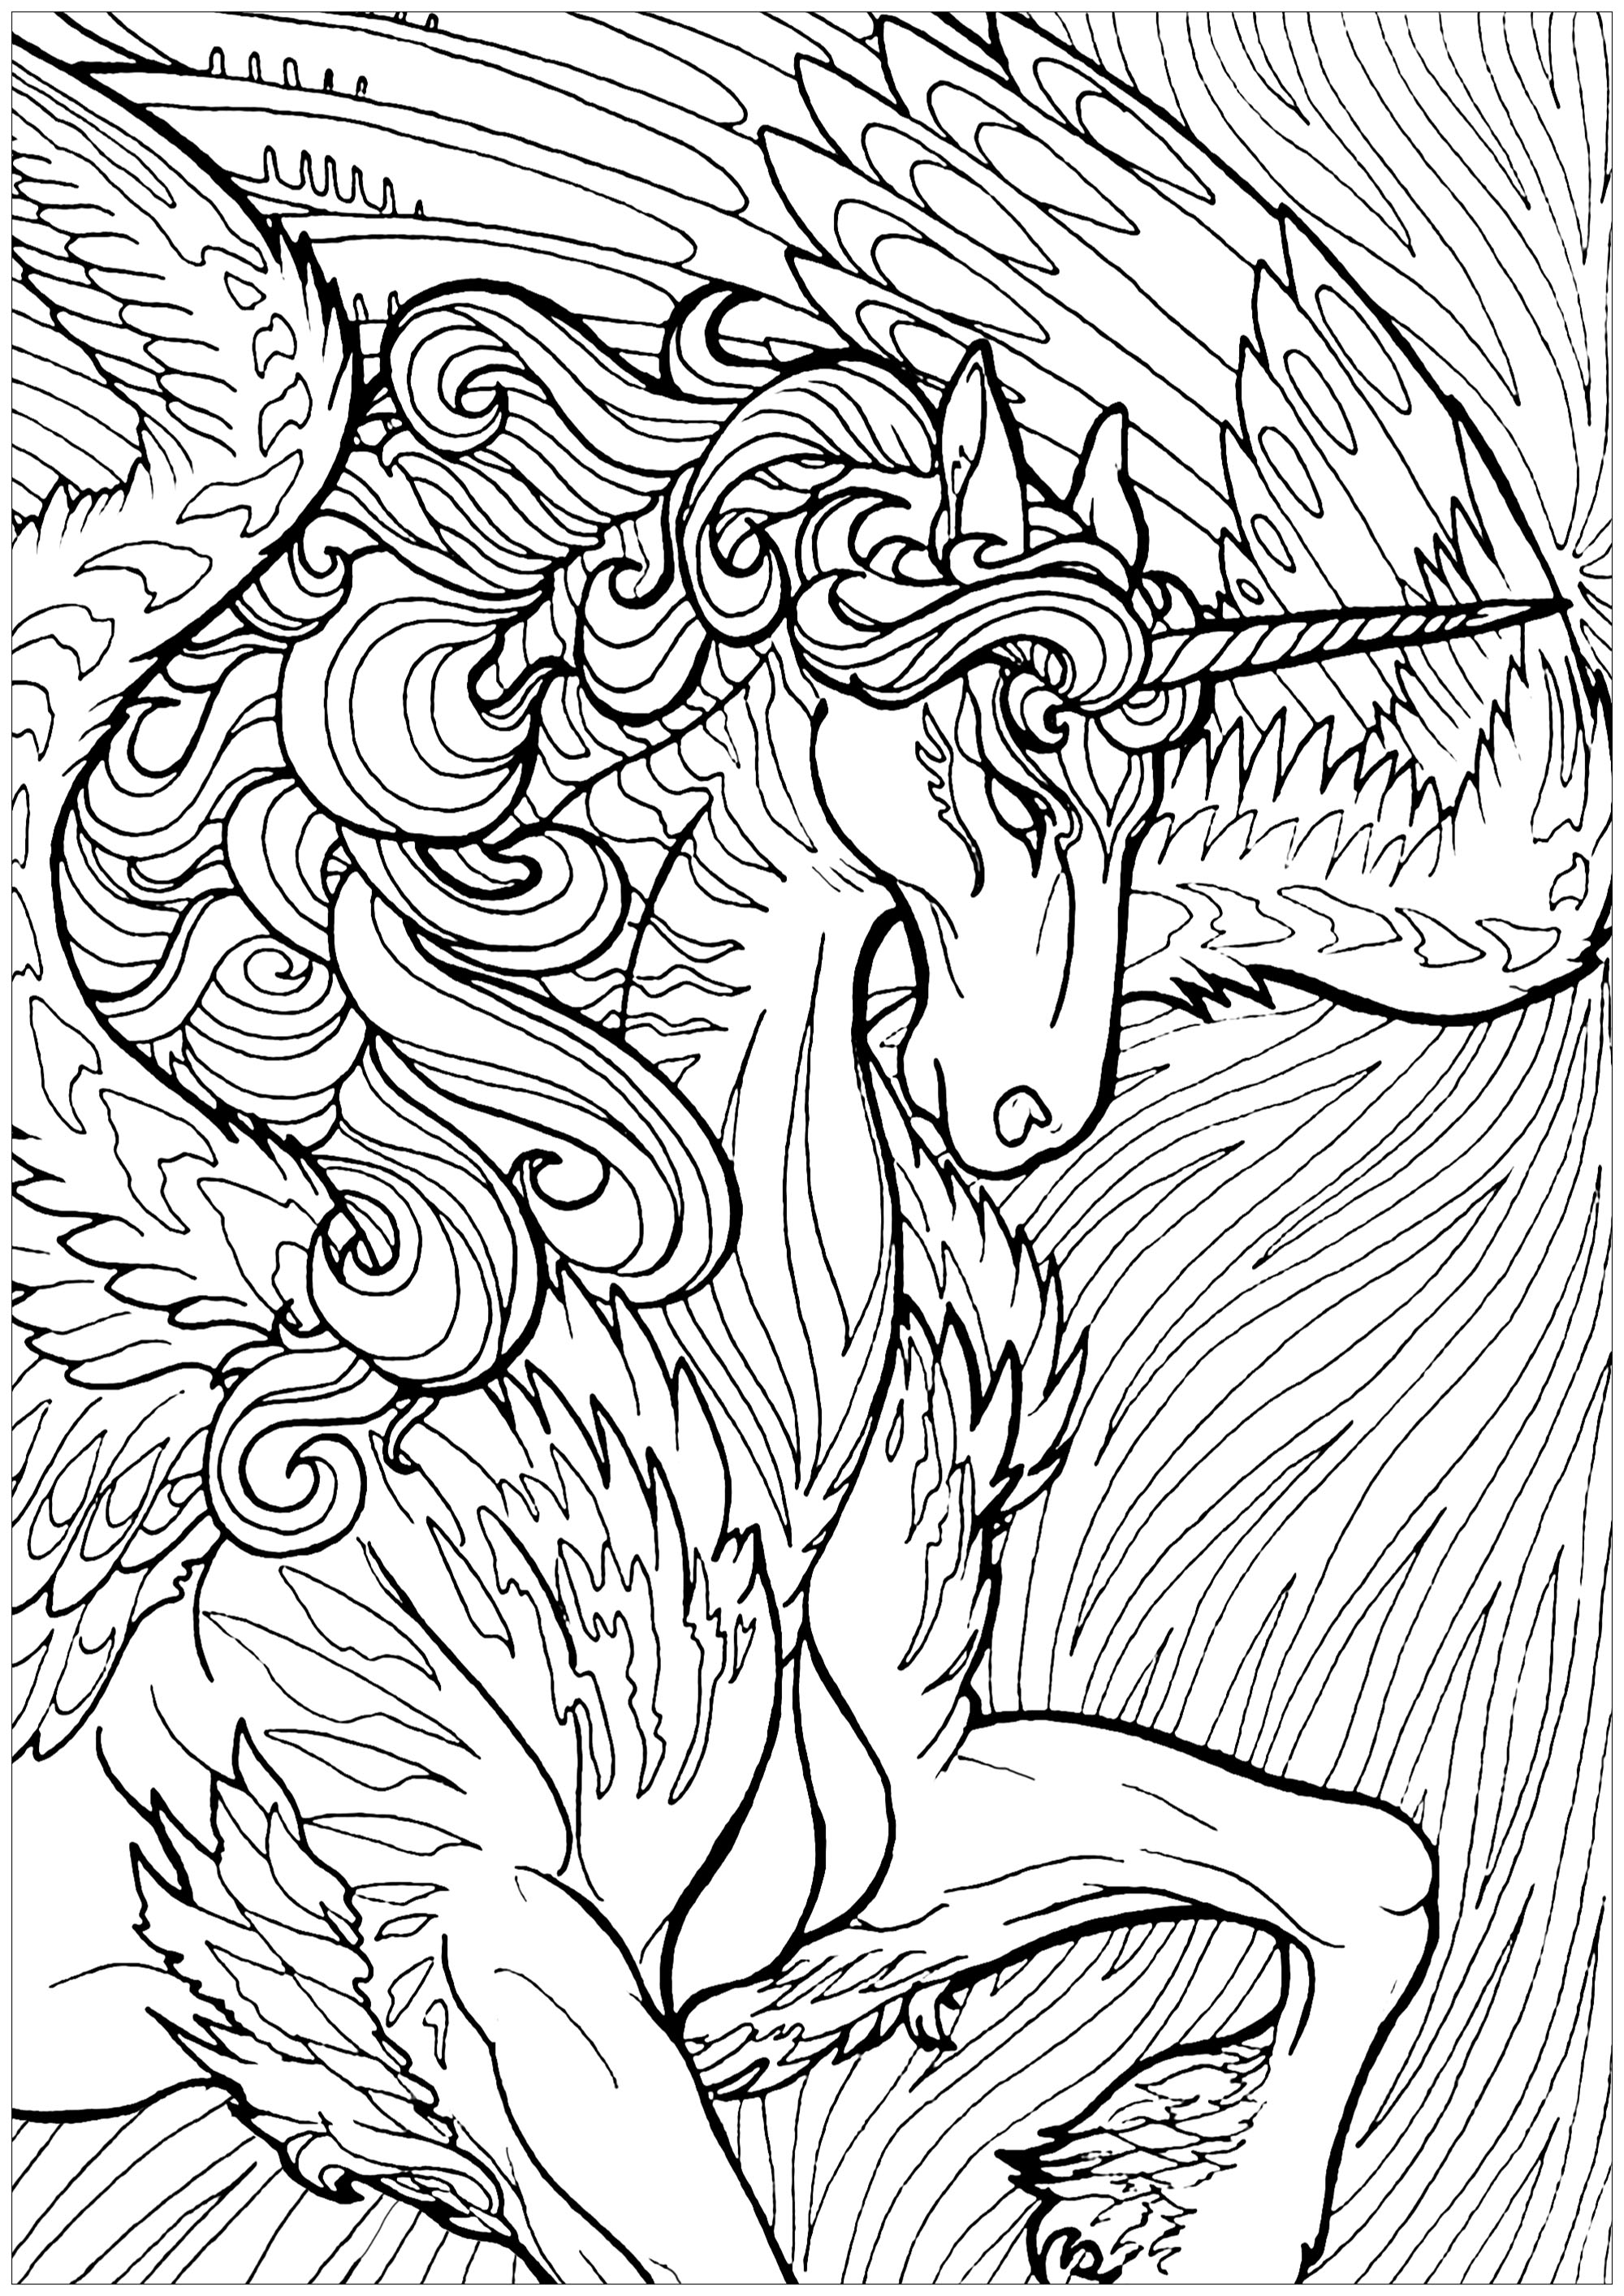 Download Unicorn with wings and background - Unicorns Adult ...